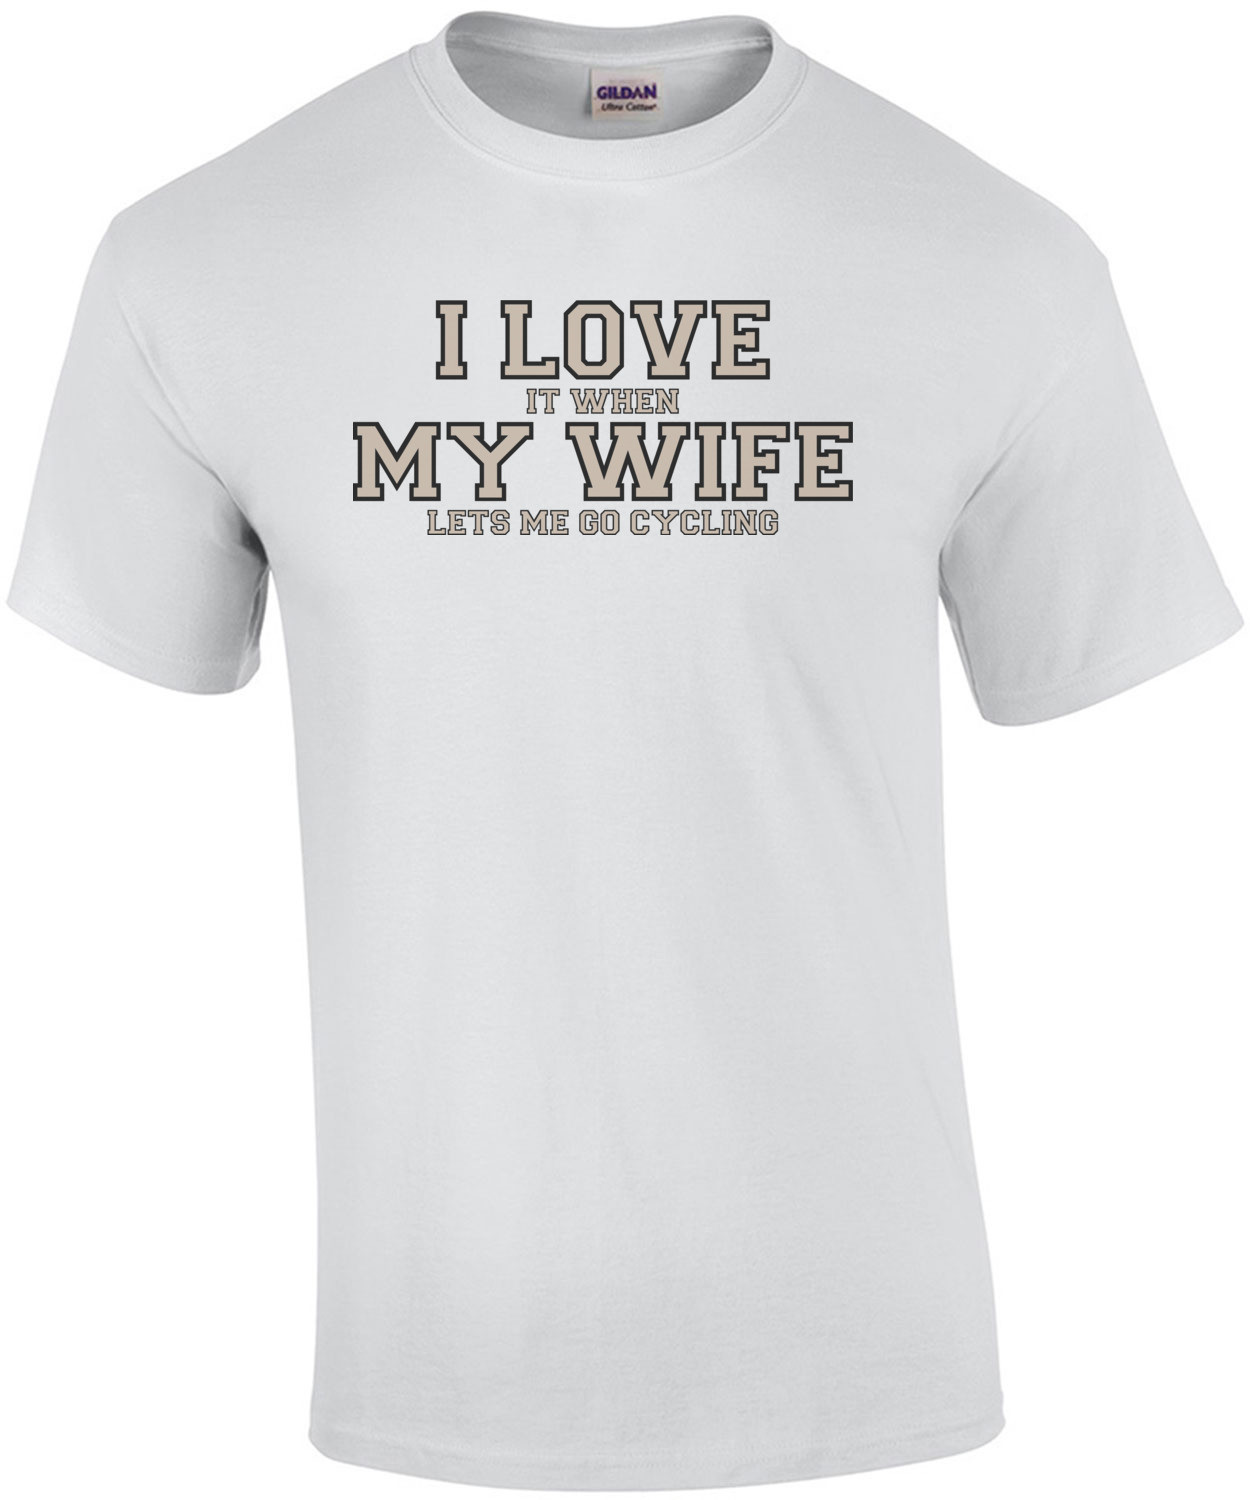 I love it when my wife lets me go cycling - Funny T-Shirt